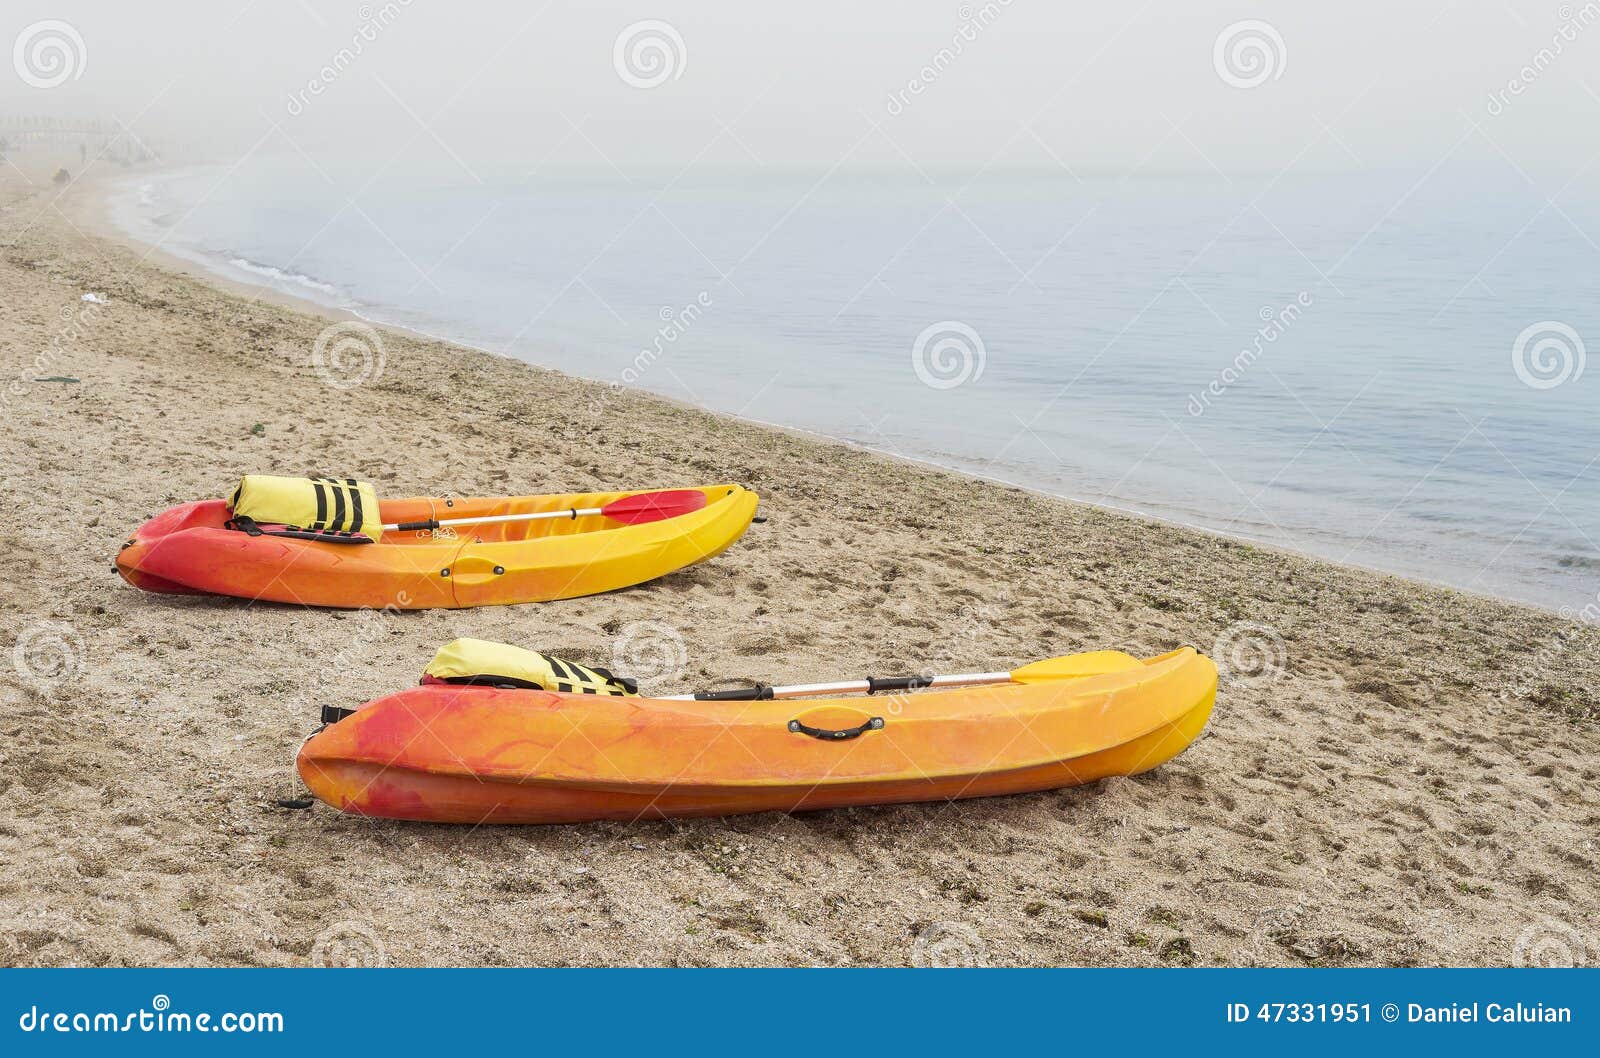 Colorful Canoe Boats on Sea Shore in Thick Fog Stock Image - Image of ...